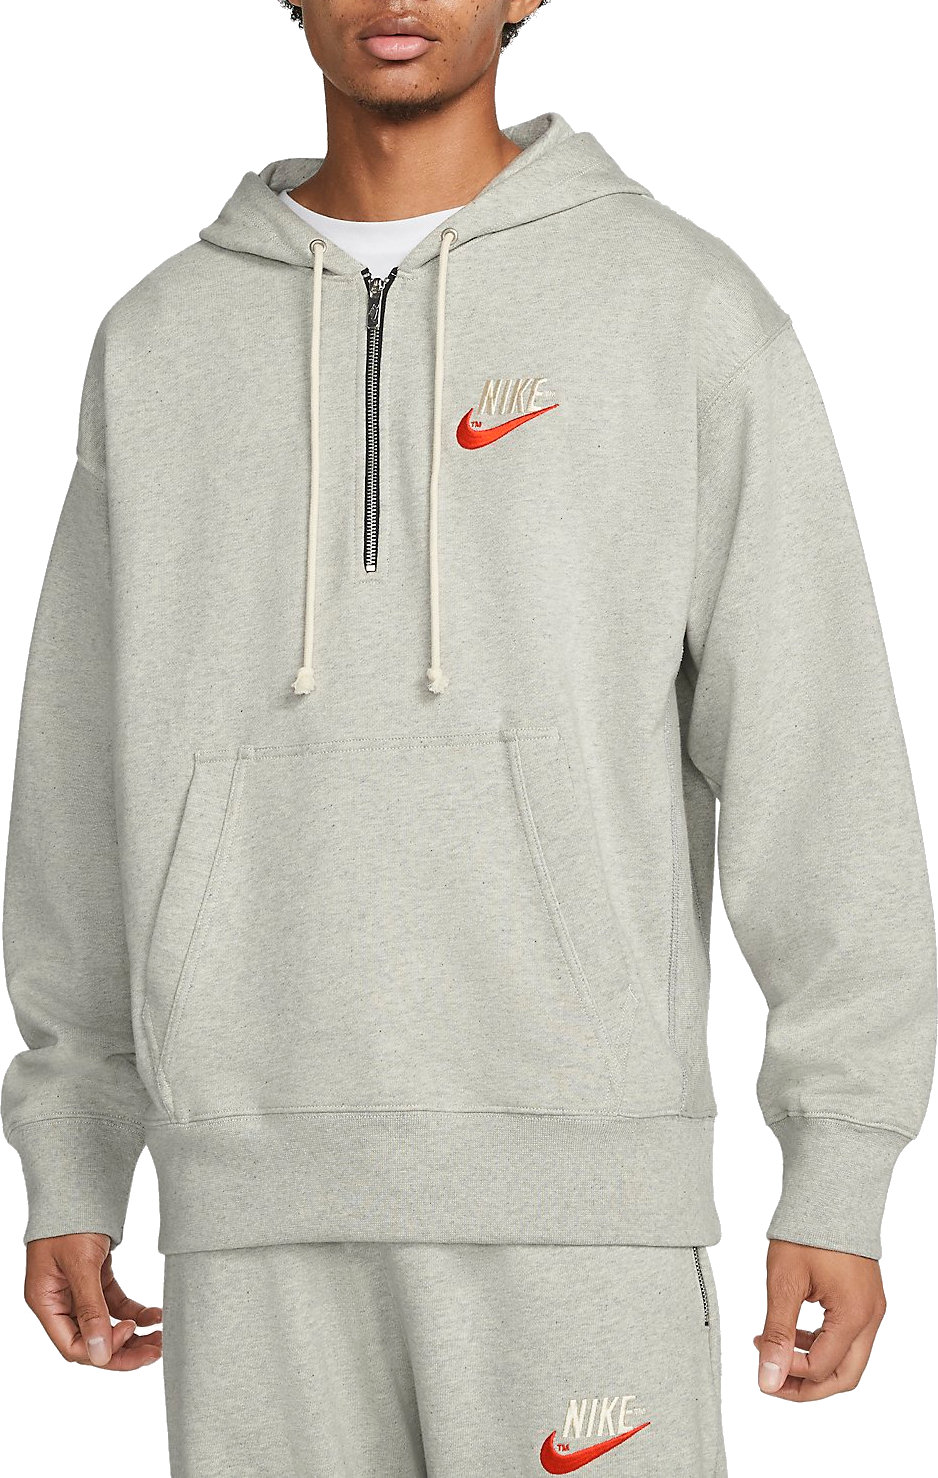 Nike Sportswear - Men's French Terry Pullover Hoodie